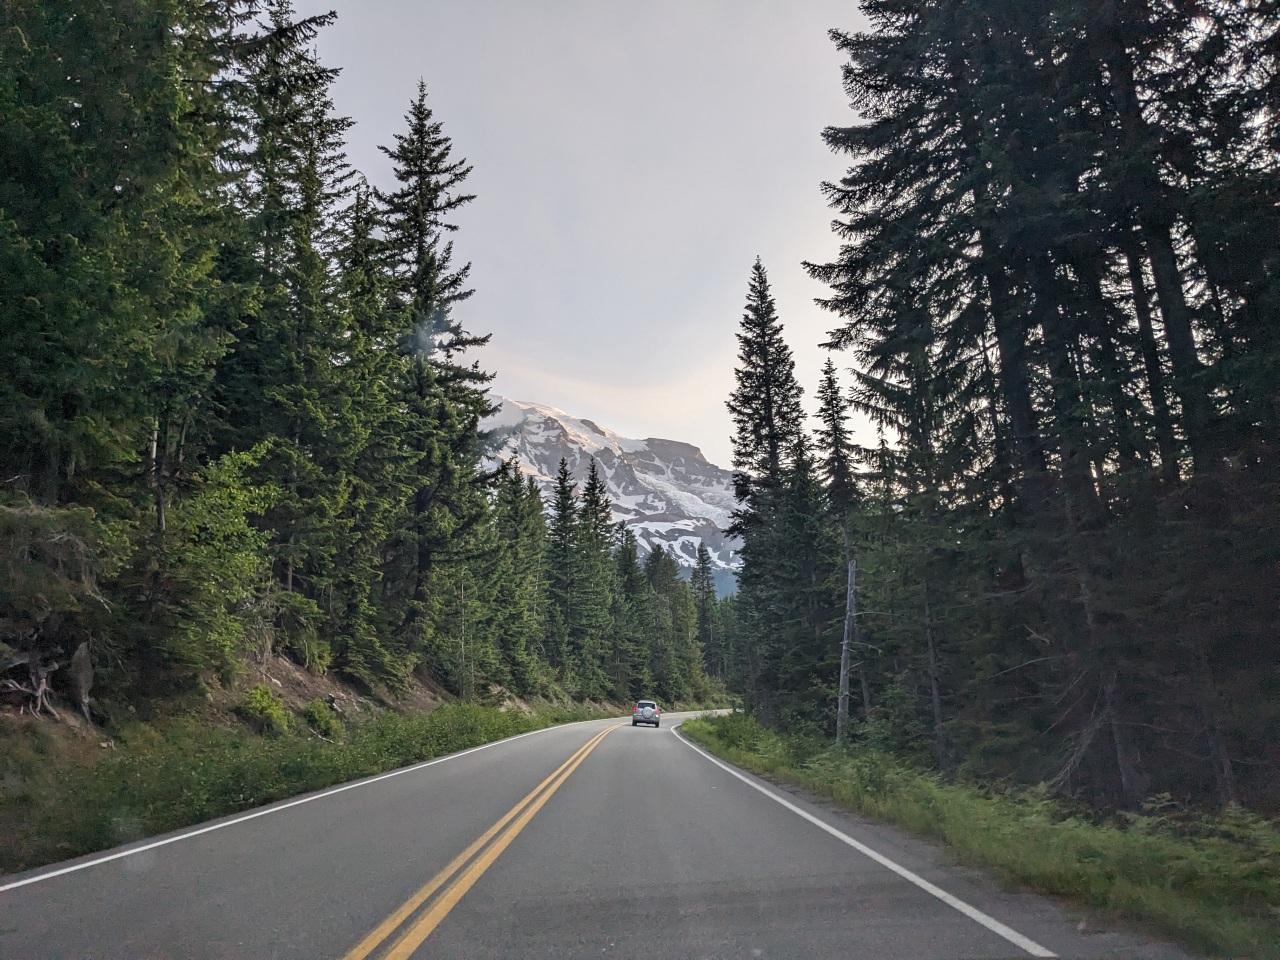 July 4th, Early Morning, Mt. Rainier National Park